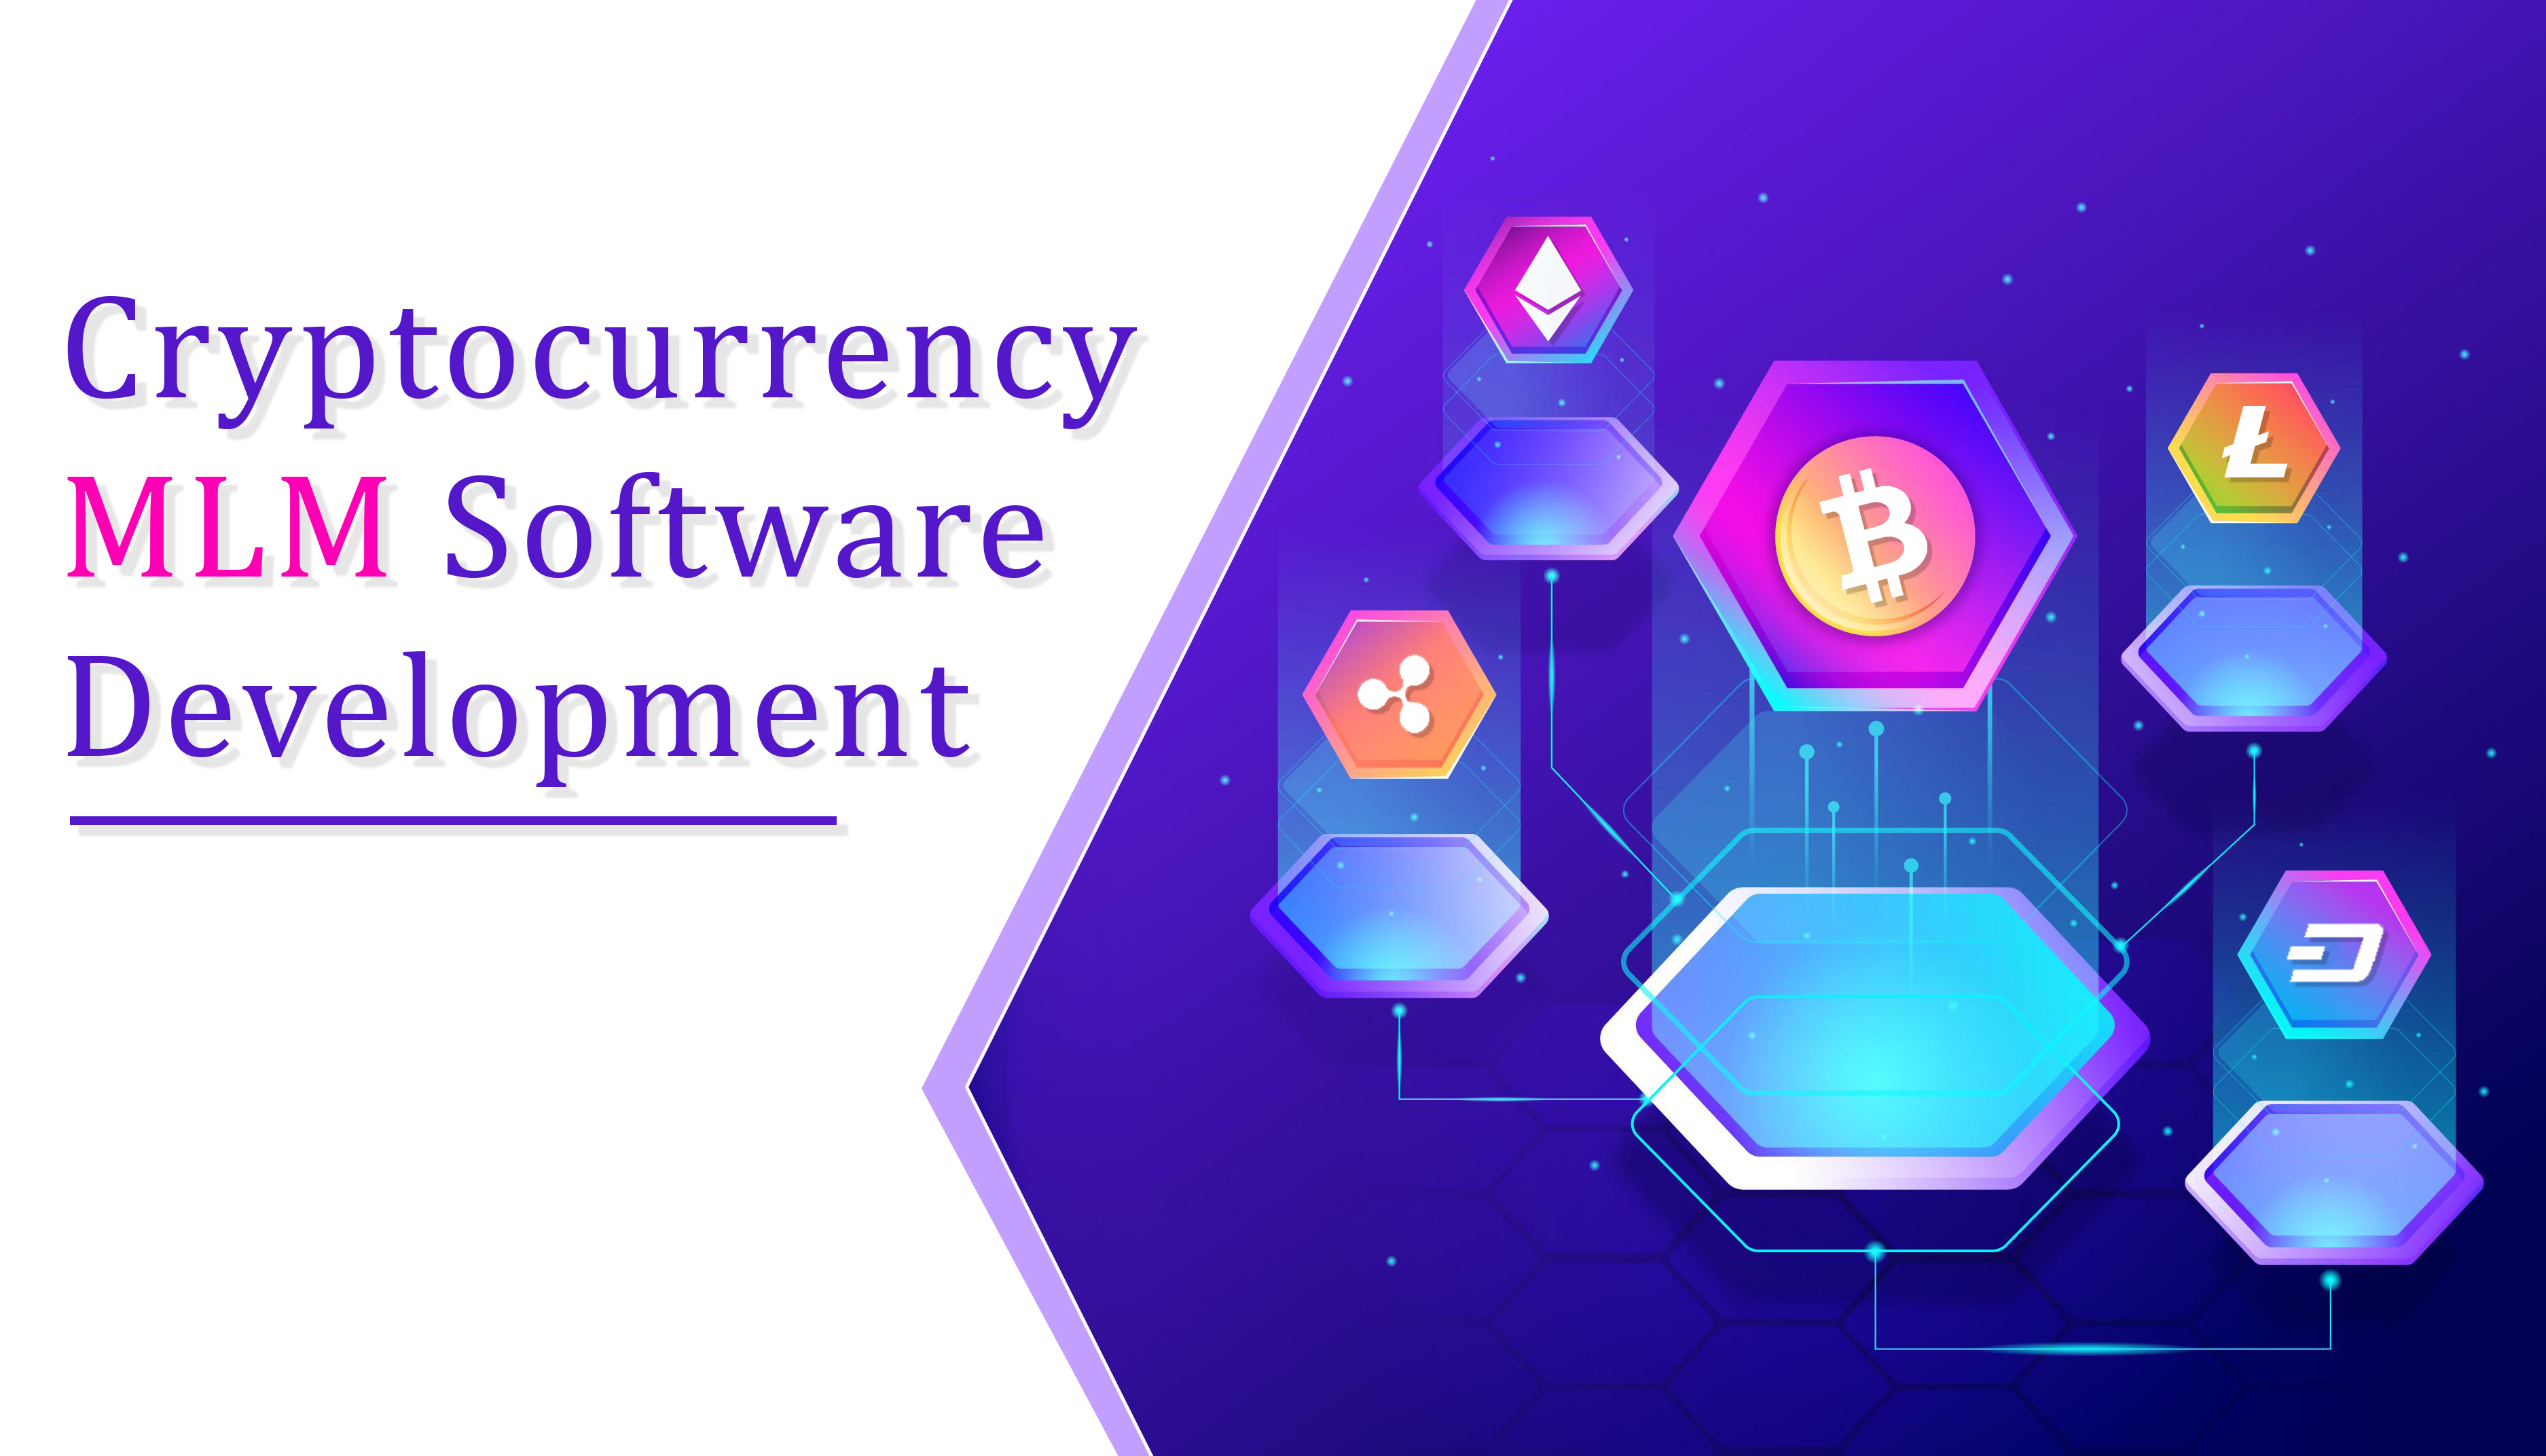 Cryptocurrency
MLM Software
Development